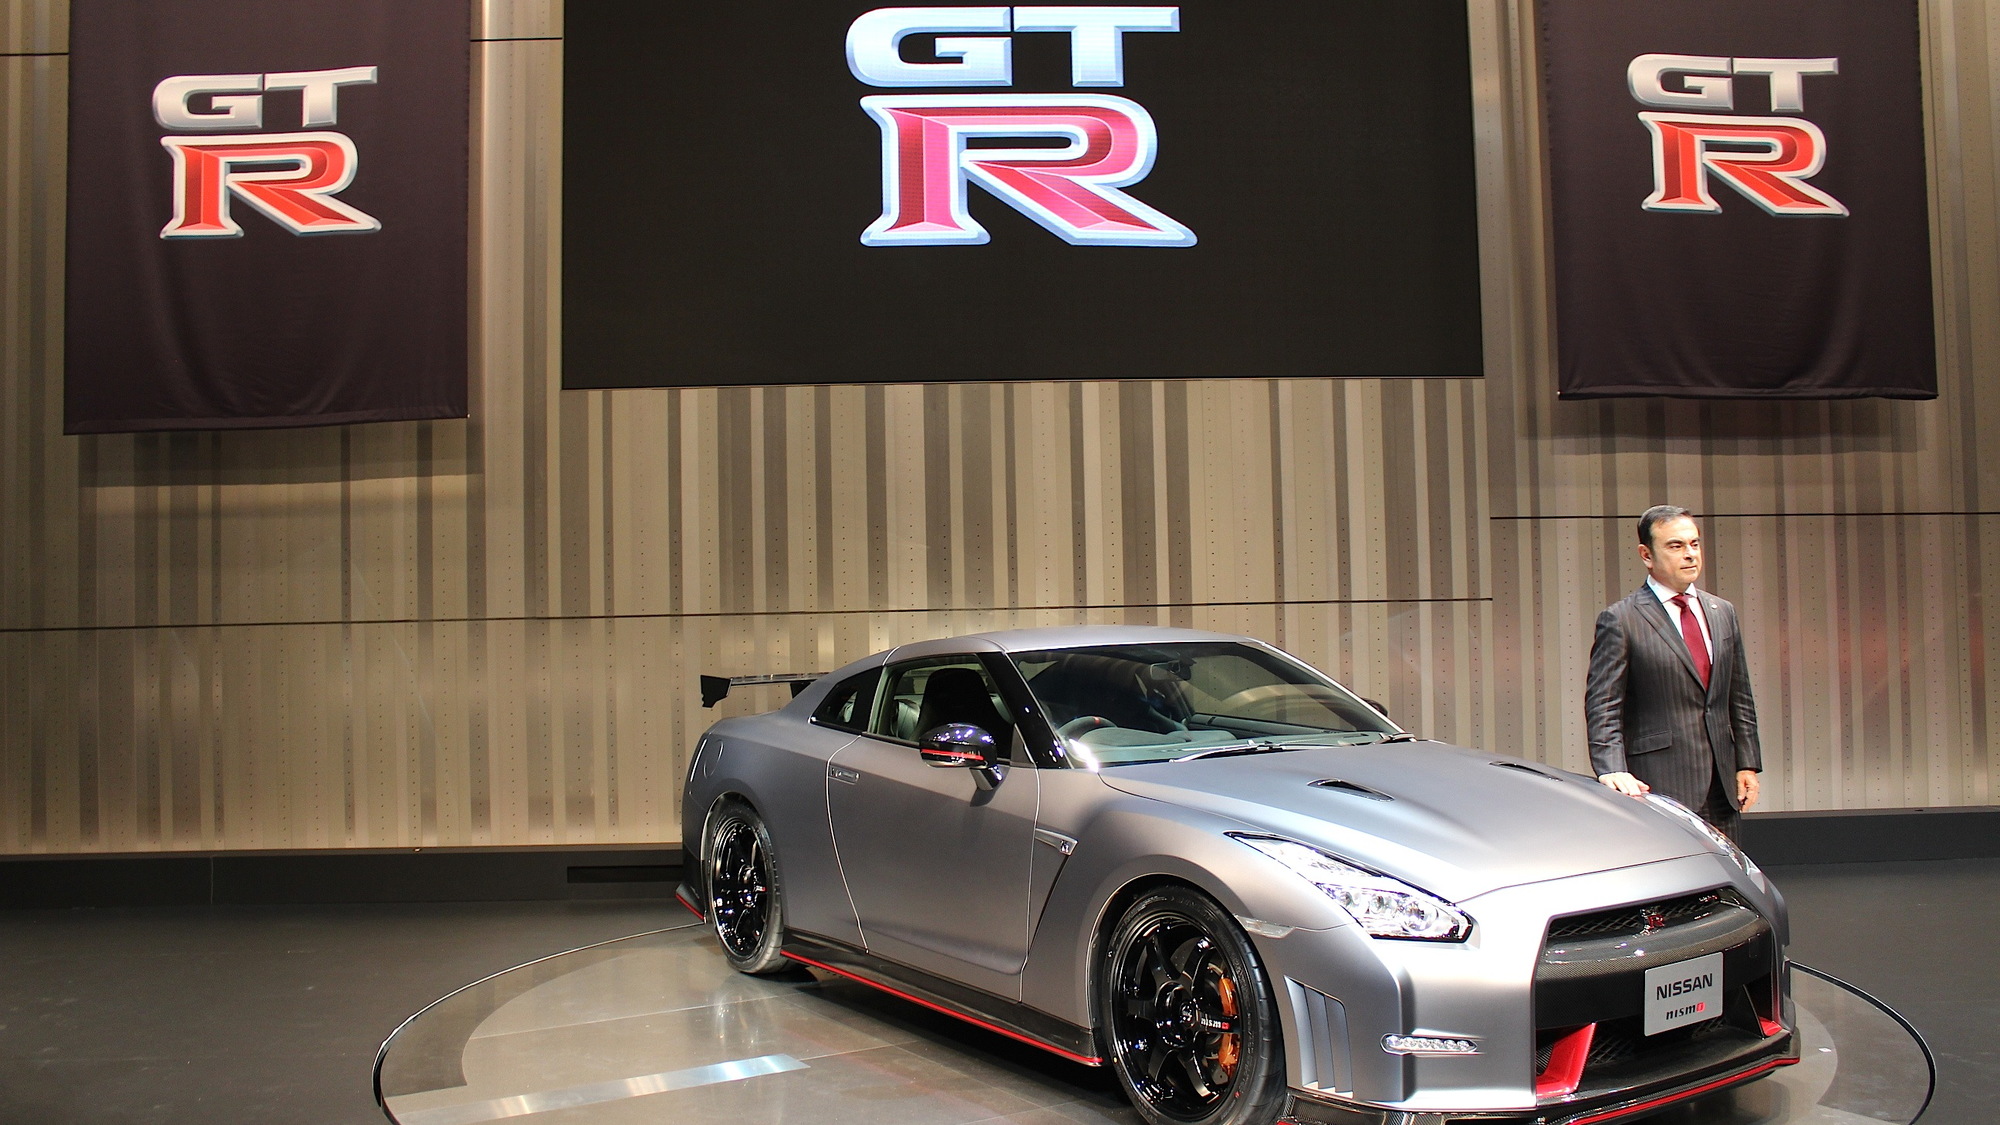 Nissan CEO Carlos Ghosn, introducing the 2015 Nissan GT-R NISMO prior to the 2013 Tokyo Motor Show